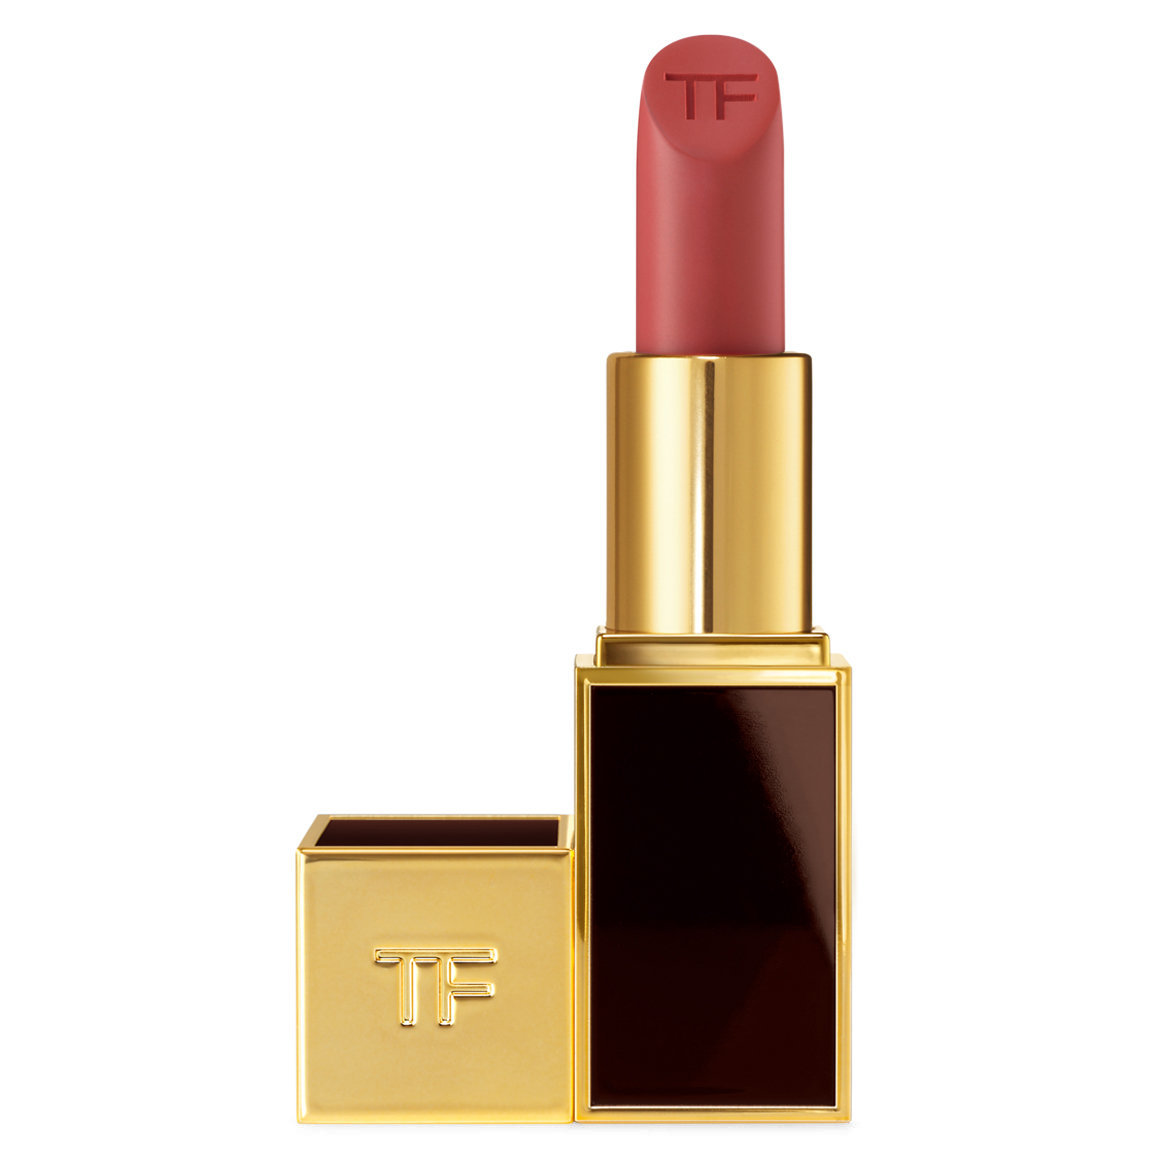 TOM FORD Lip Color Matte Age of Consent alternative view 1.